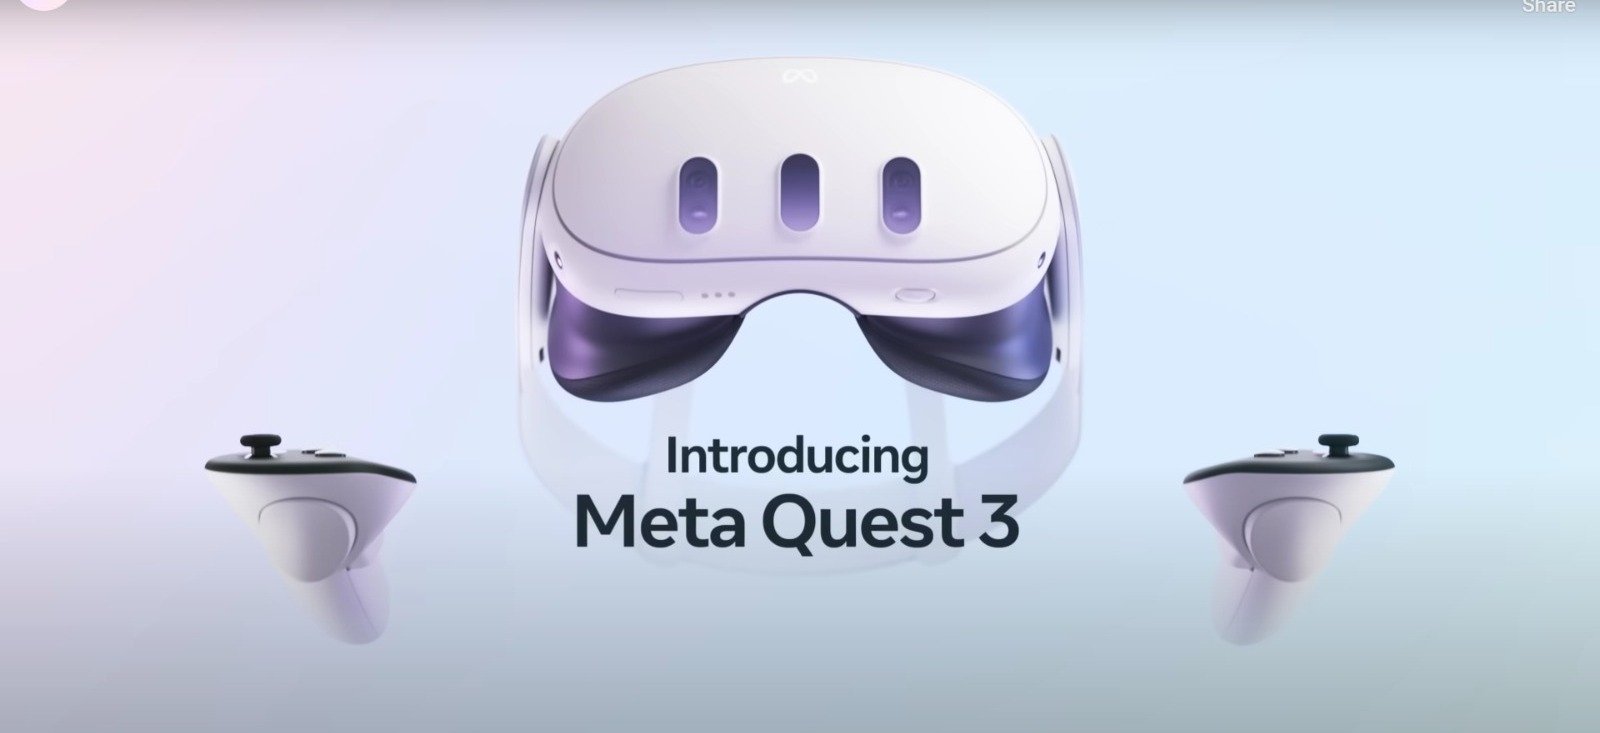 Quest VR headset